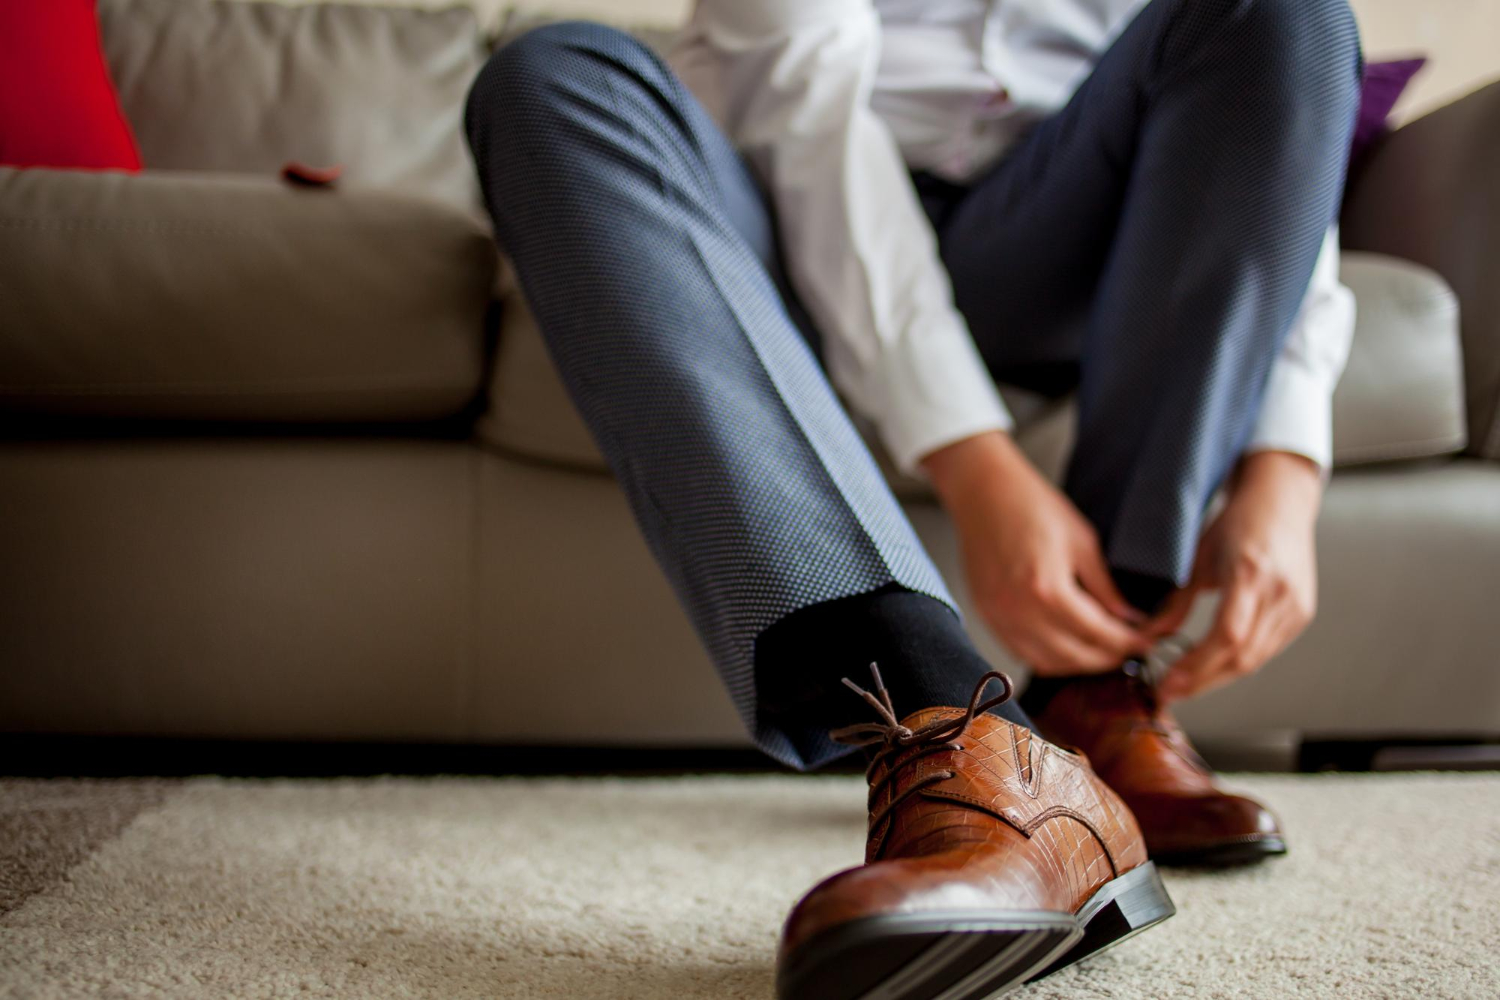 How to color match blue pants and brown shoes